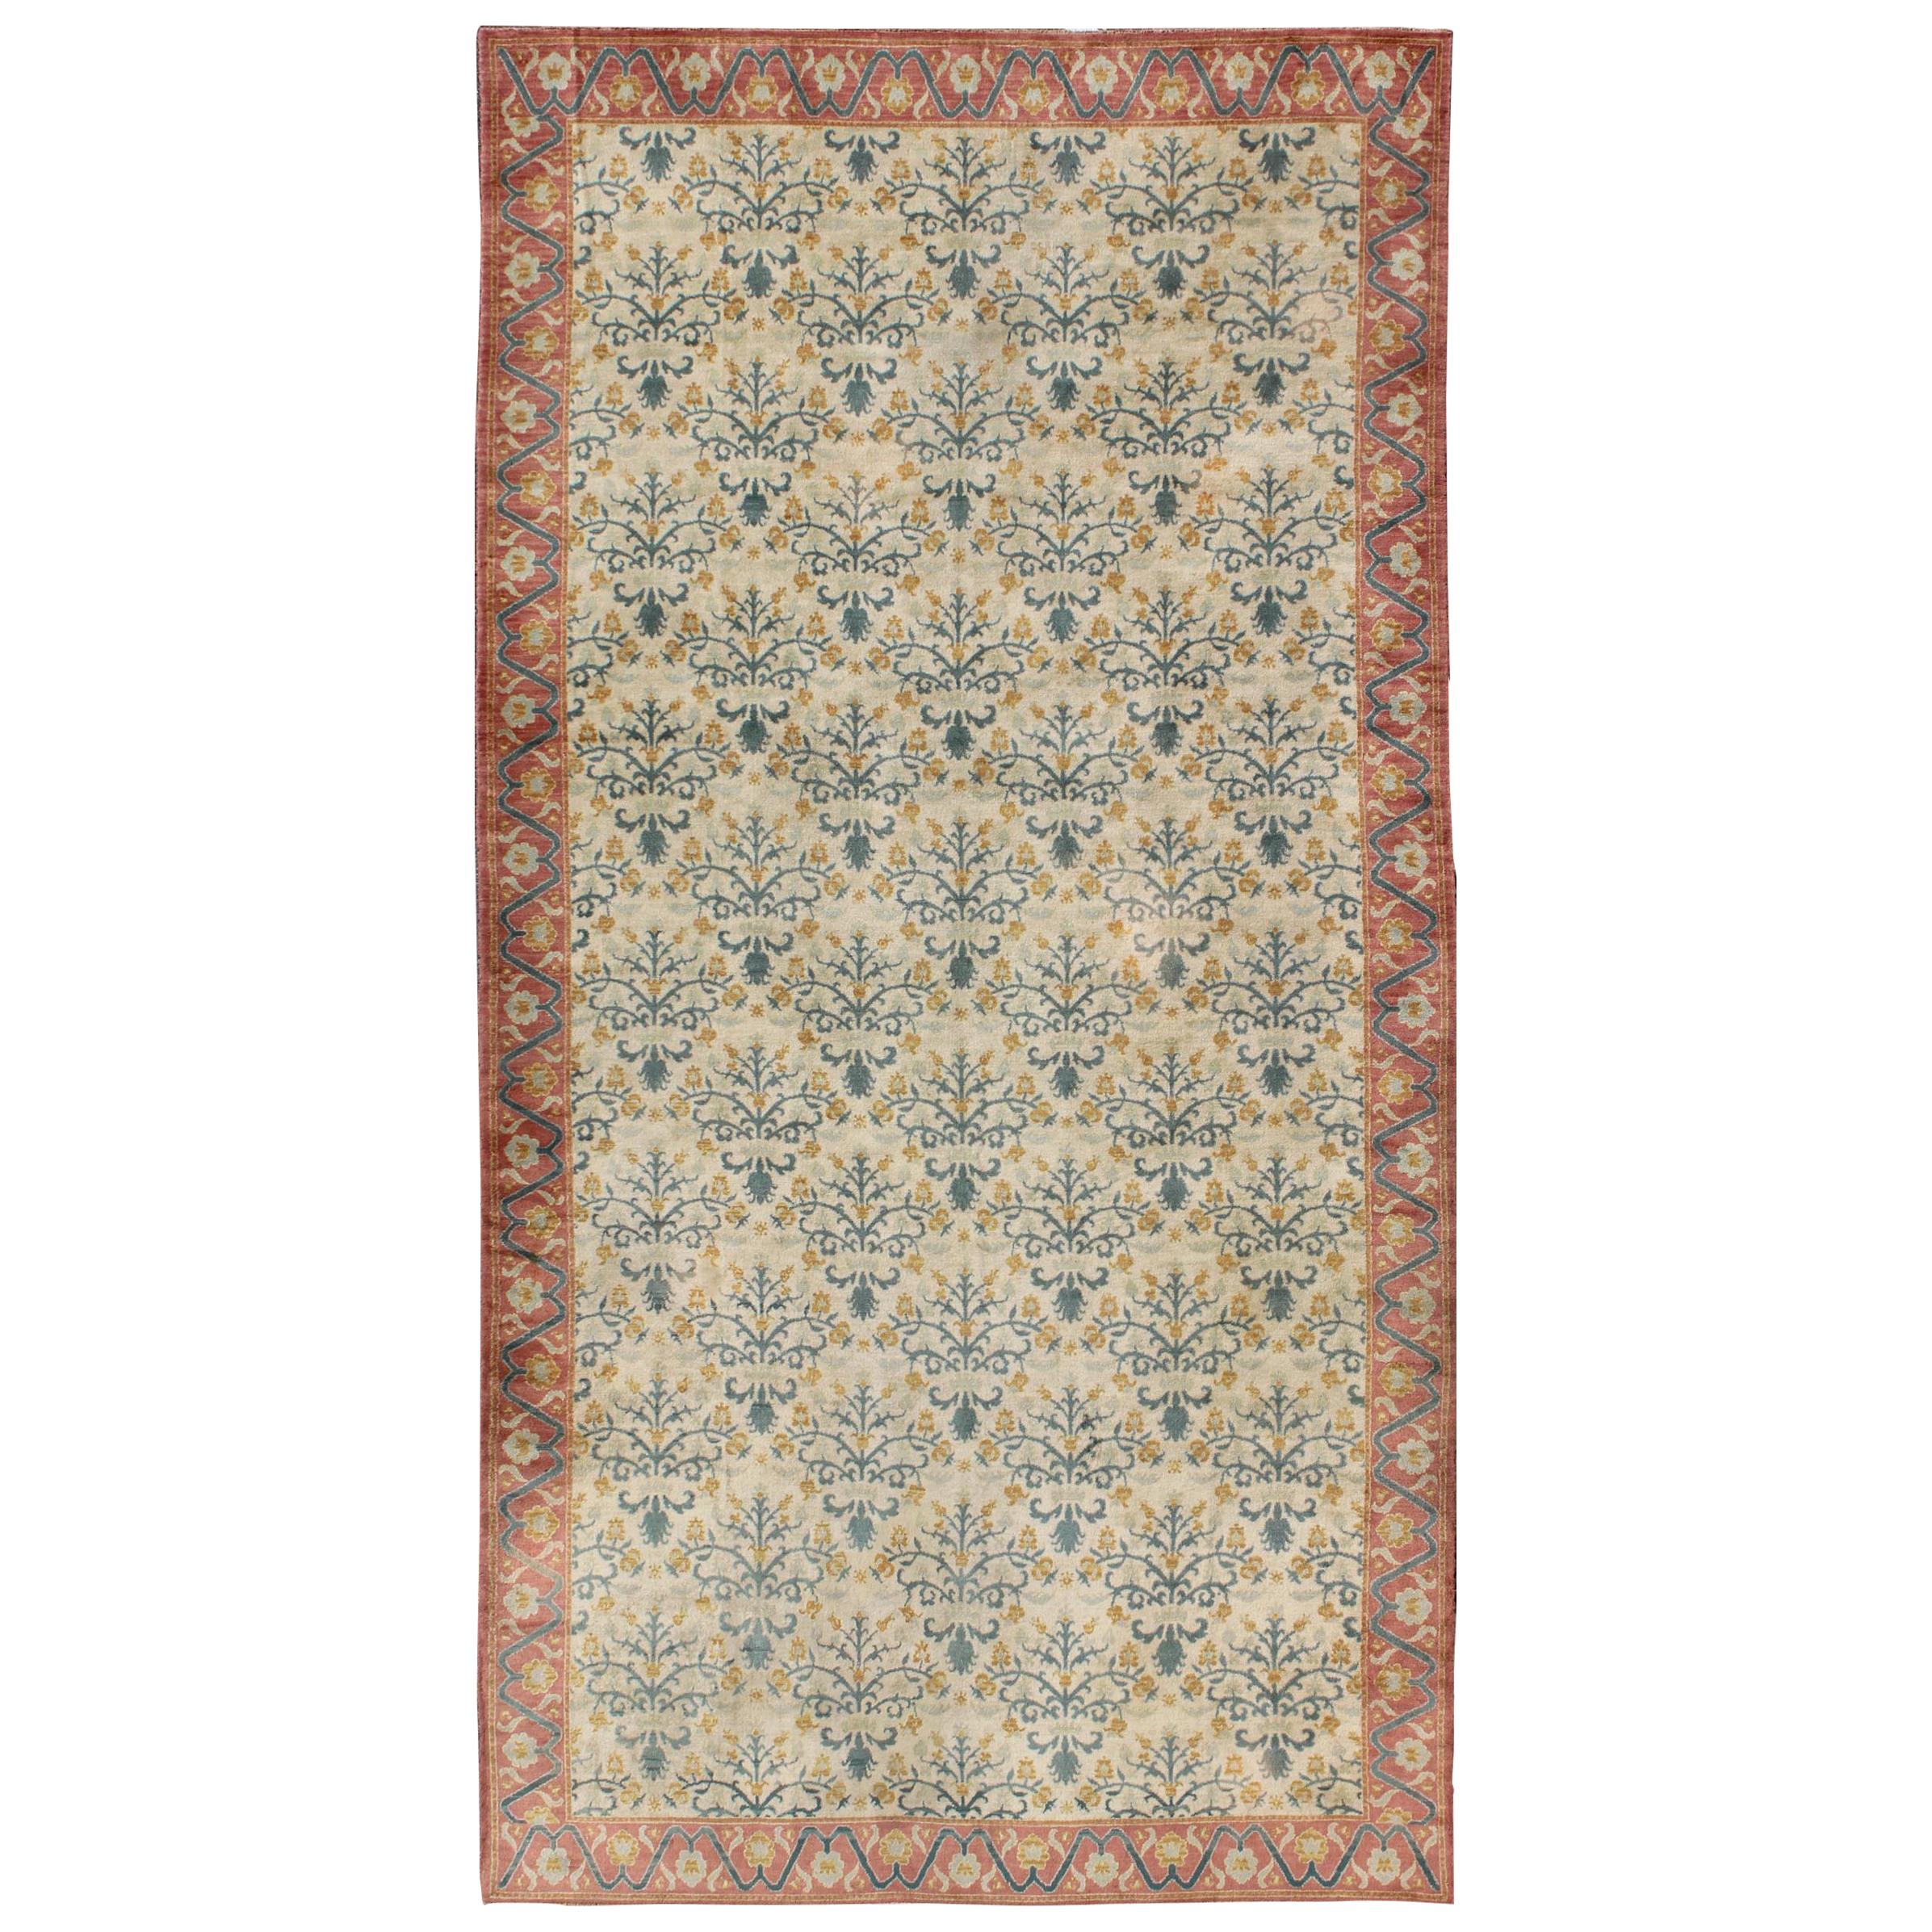 Large and Colorful Antique Spanish Rug with All-Over Design in Coral  and cream